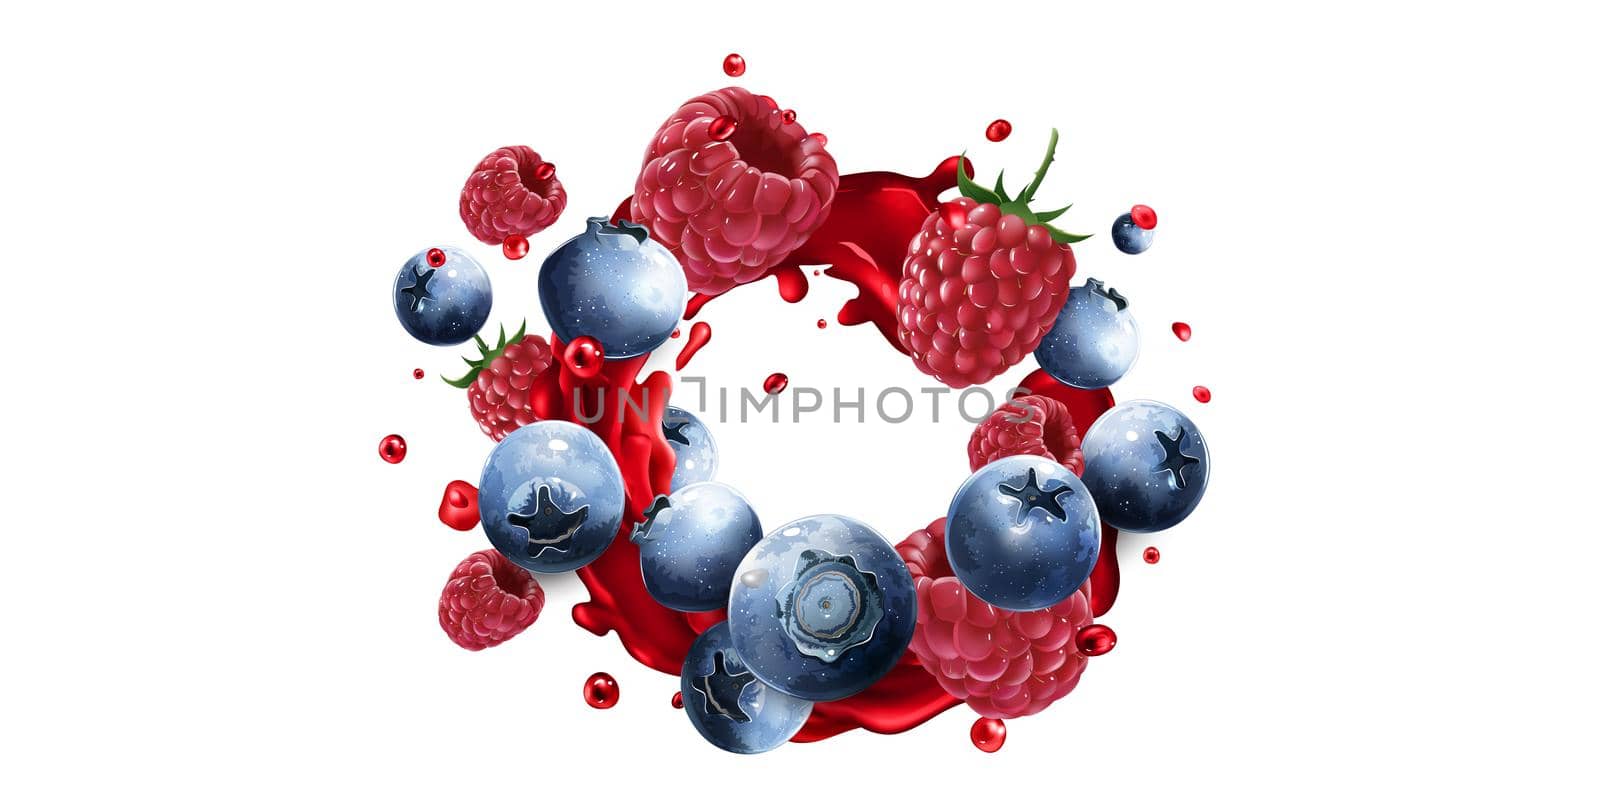 Fresh blueberries and raspberries in fruit juice splashes on a white background. Realistic style illustration.